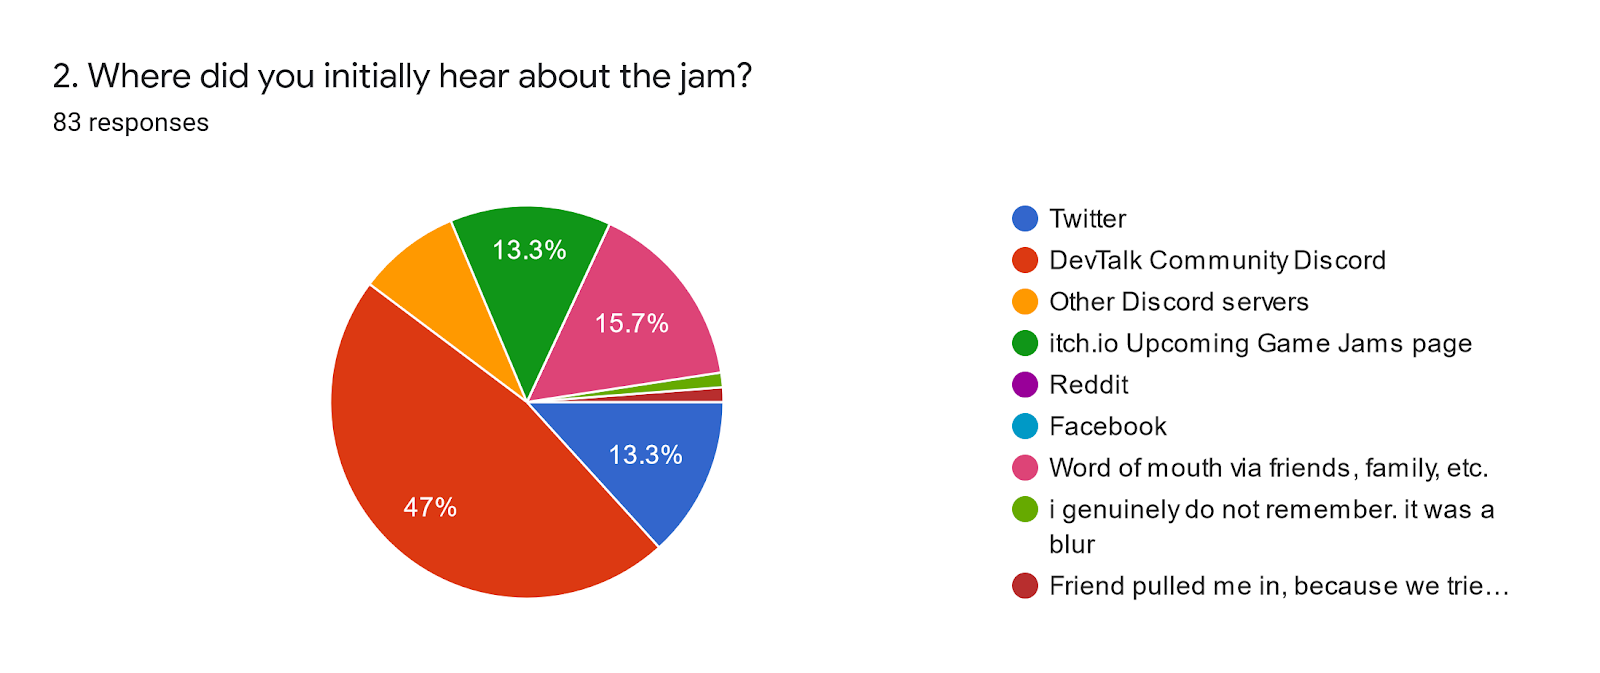 Forms response chart. Question title: 2. Where did you initially hear about the jam?. Number of responses: 83 responses.